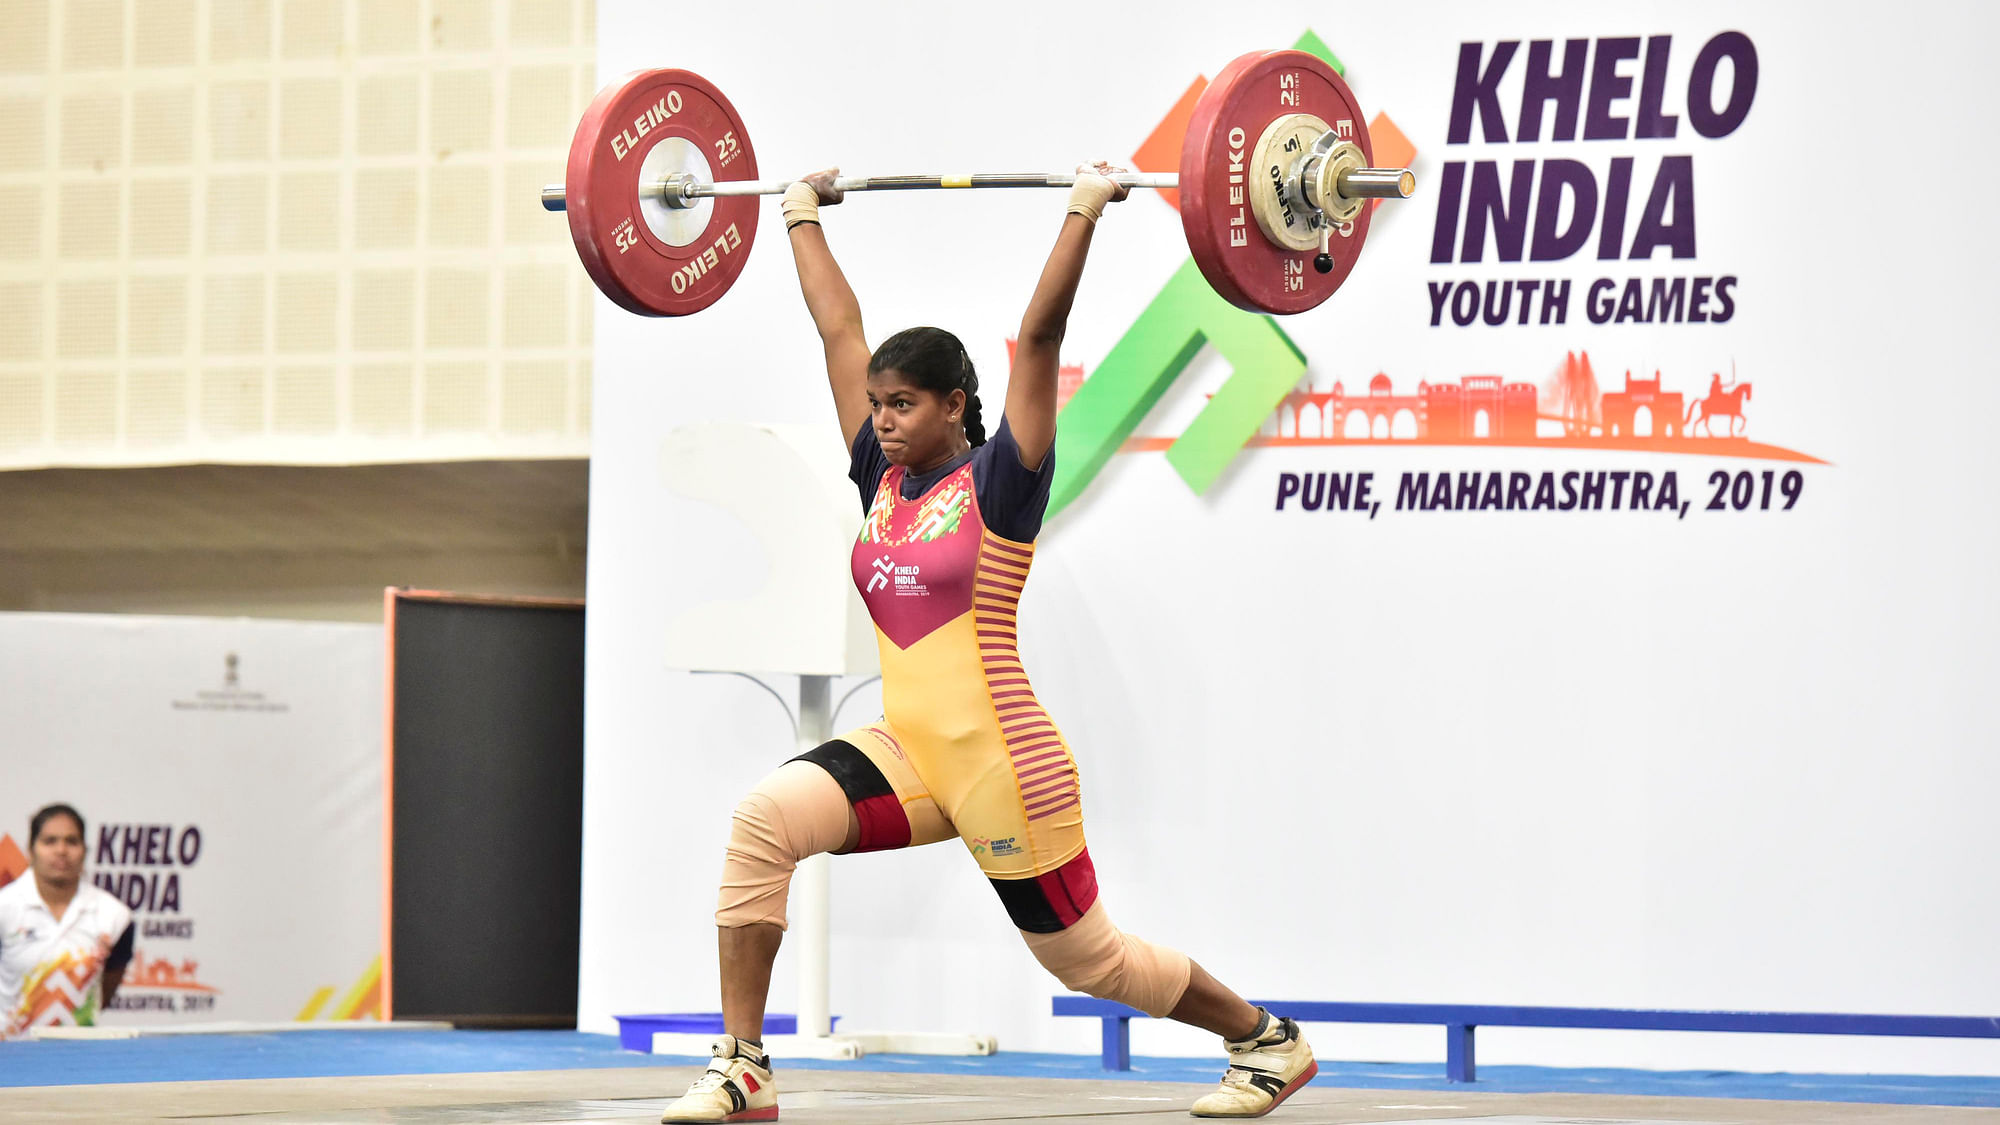 AkshataBasvani Kamati of Karnataka has won a gold medal in the under-21 age 71 kg category in weightlifting at the Khelo India Youth Games.